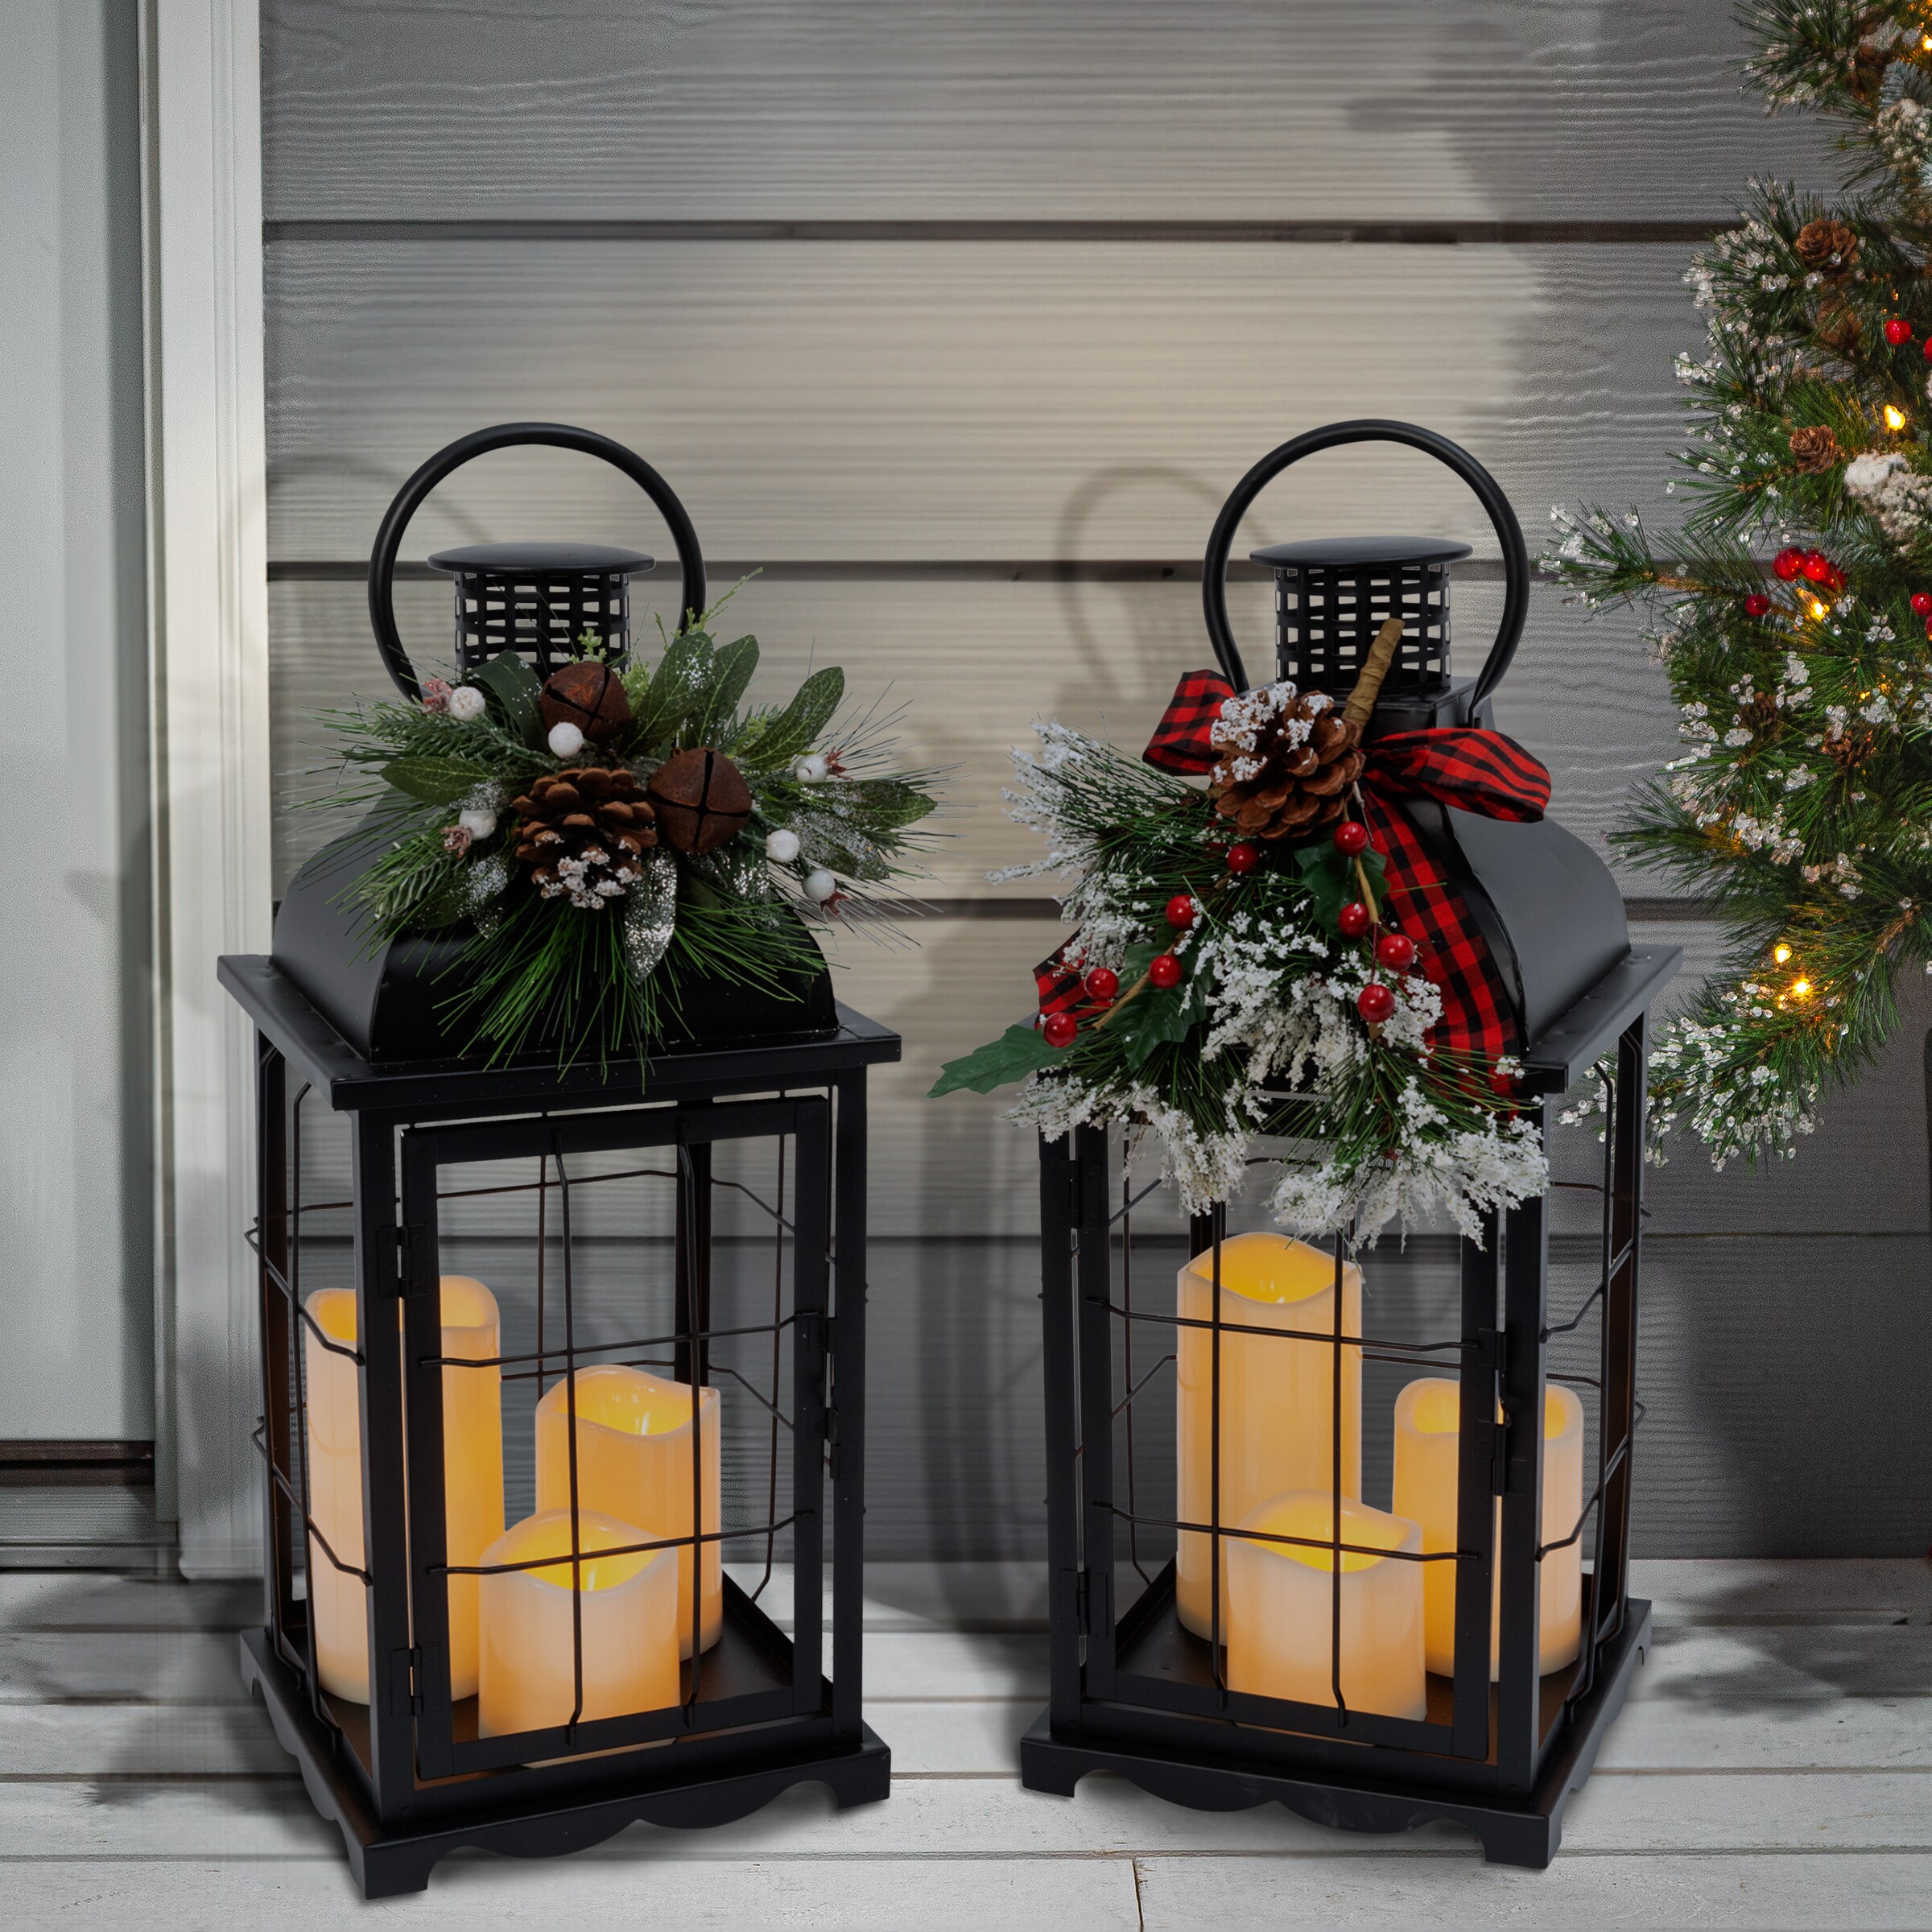 Gerson International 18.1-in Lighted Lantern (2-Pack) Battery-operated ...